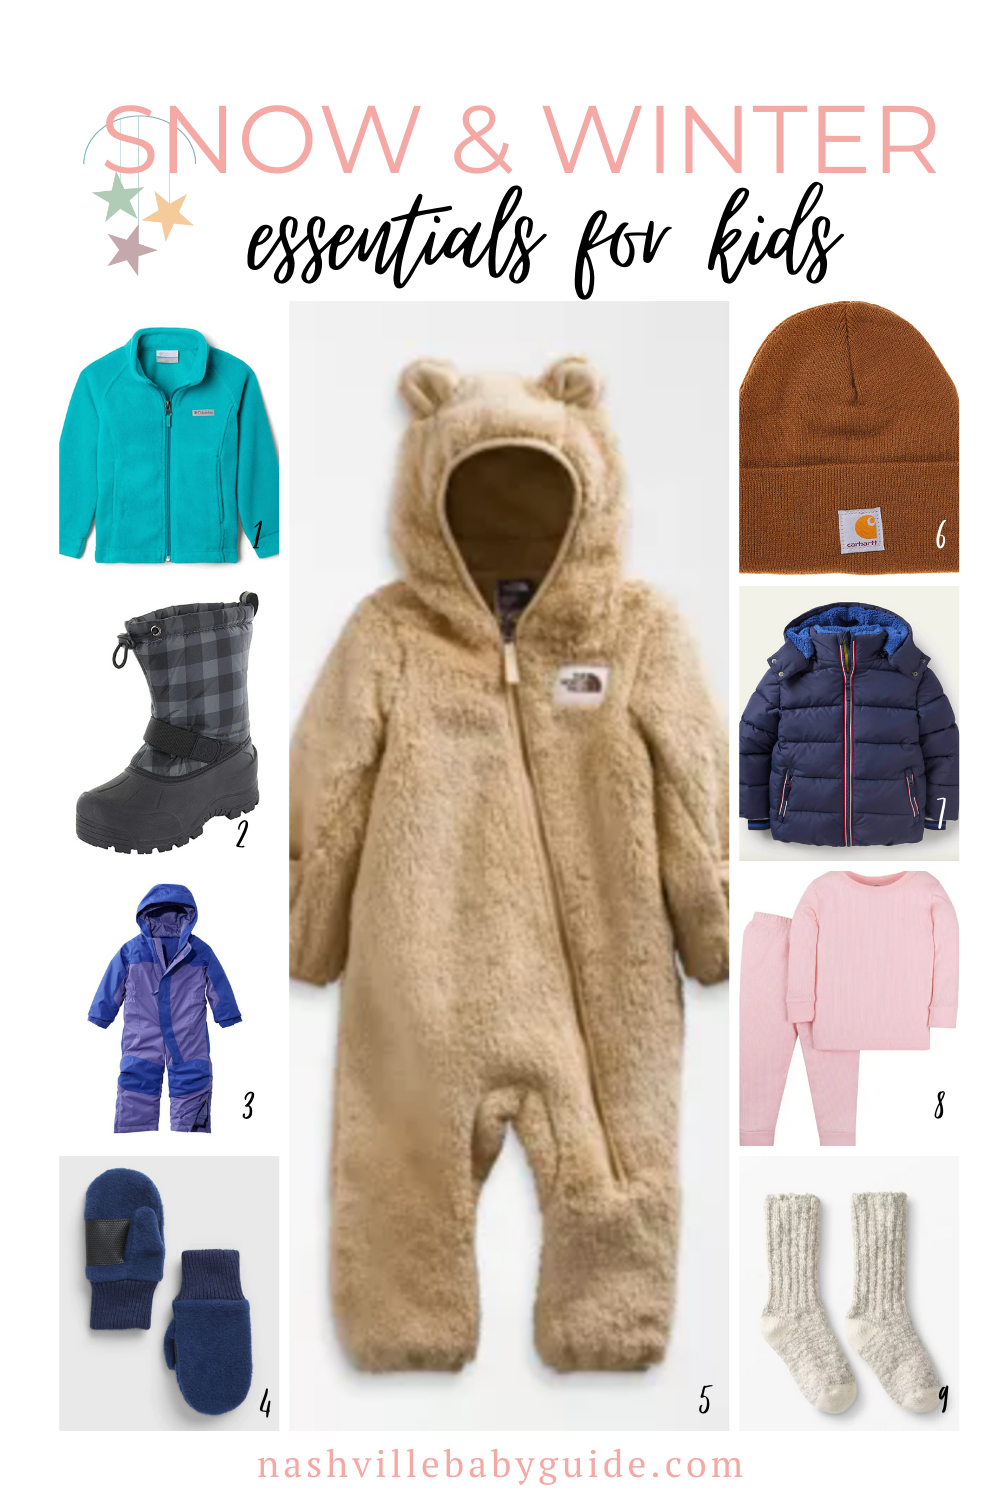 The Best Snow & Winter Gear for Kids - Nashville Baby Guide